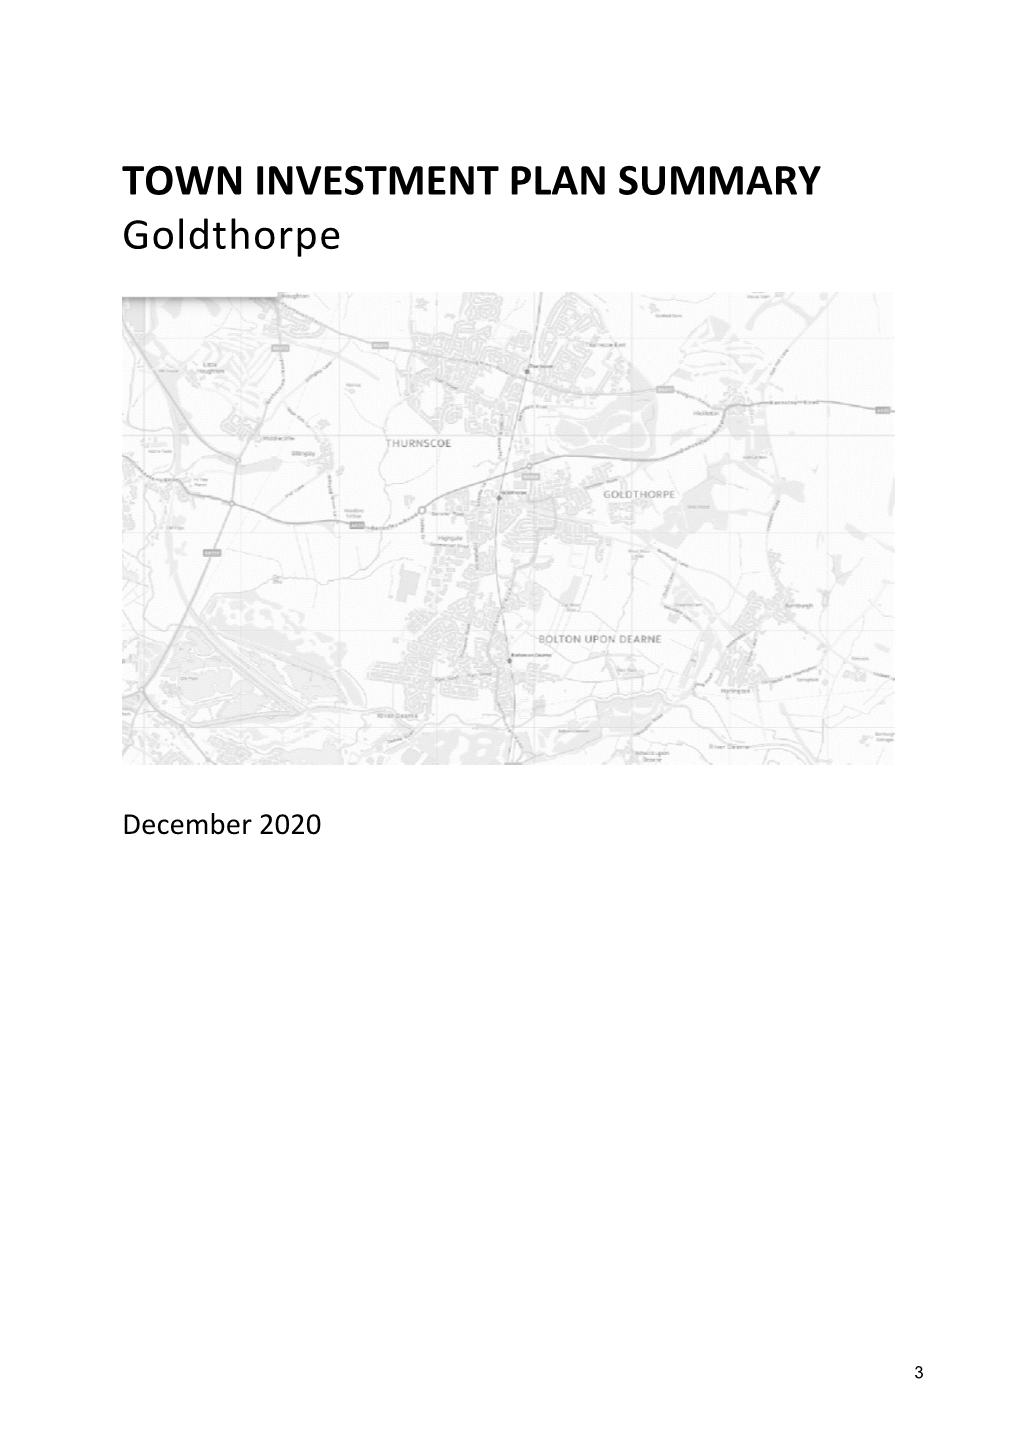 Town Investment Plan for Goldthorpe